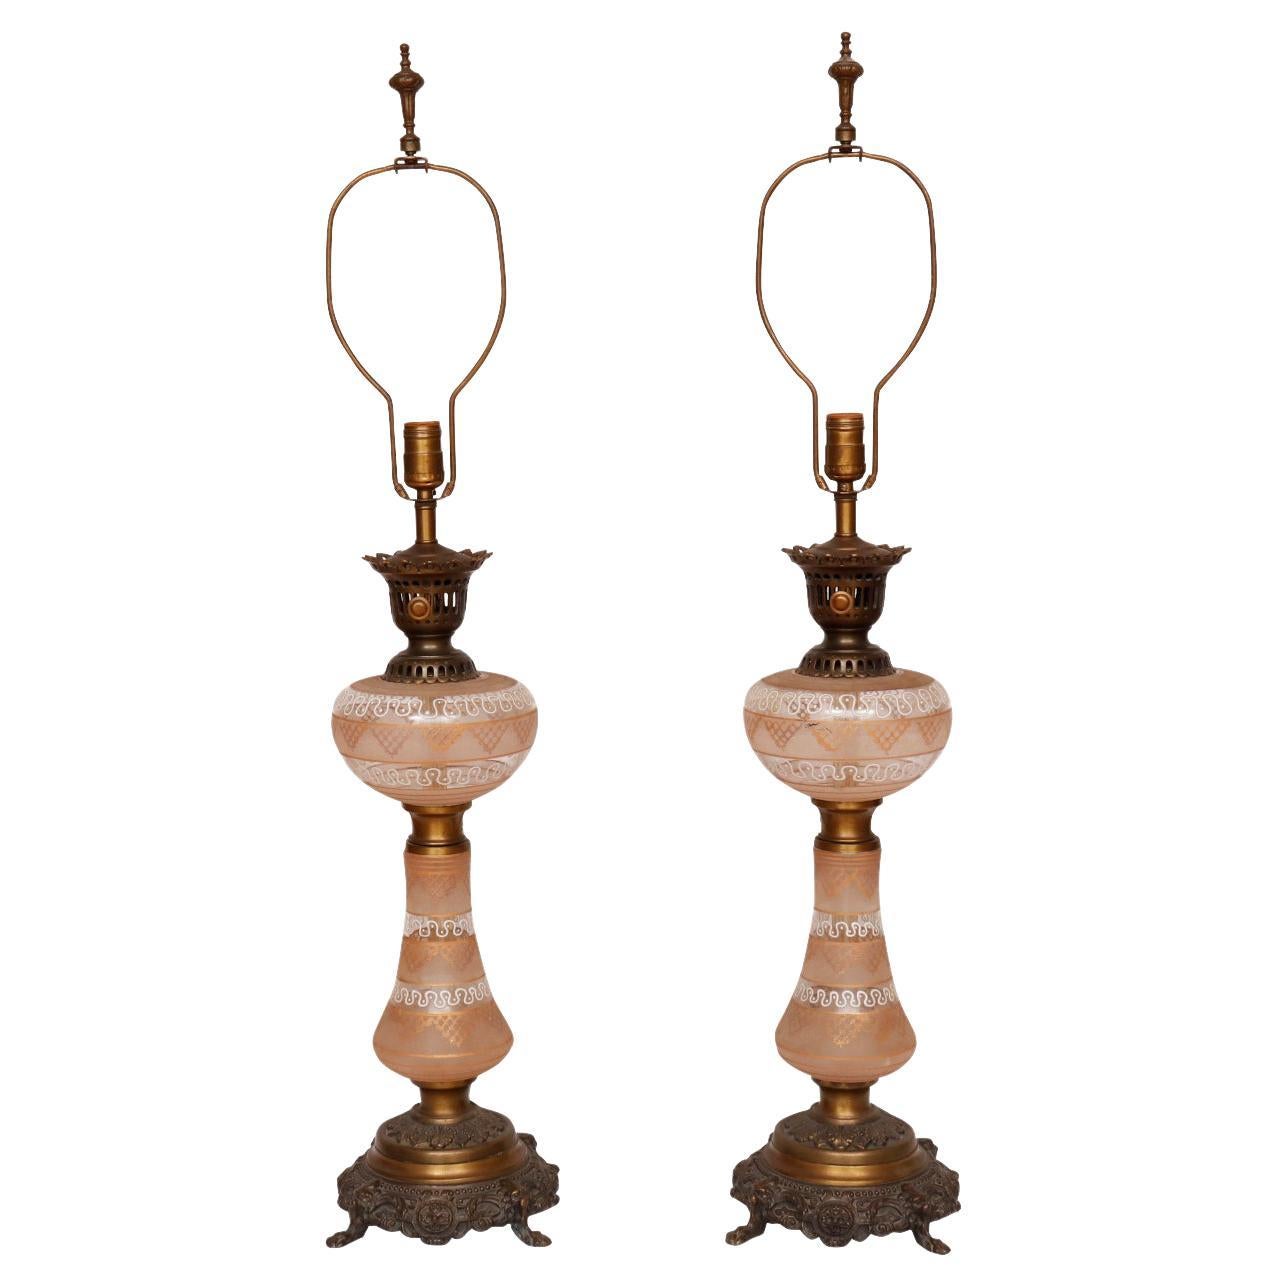 Regency Glass Table Lamps, a Pair For Sale